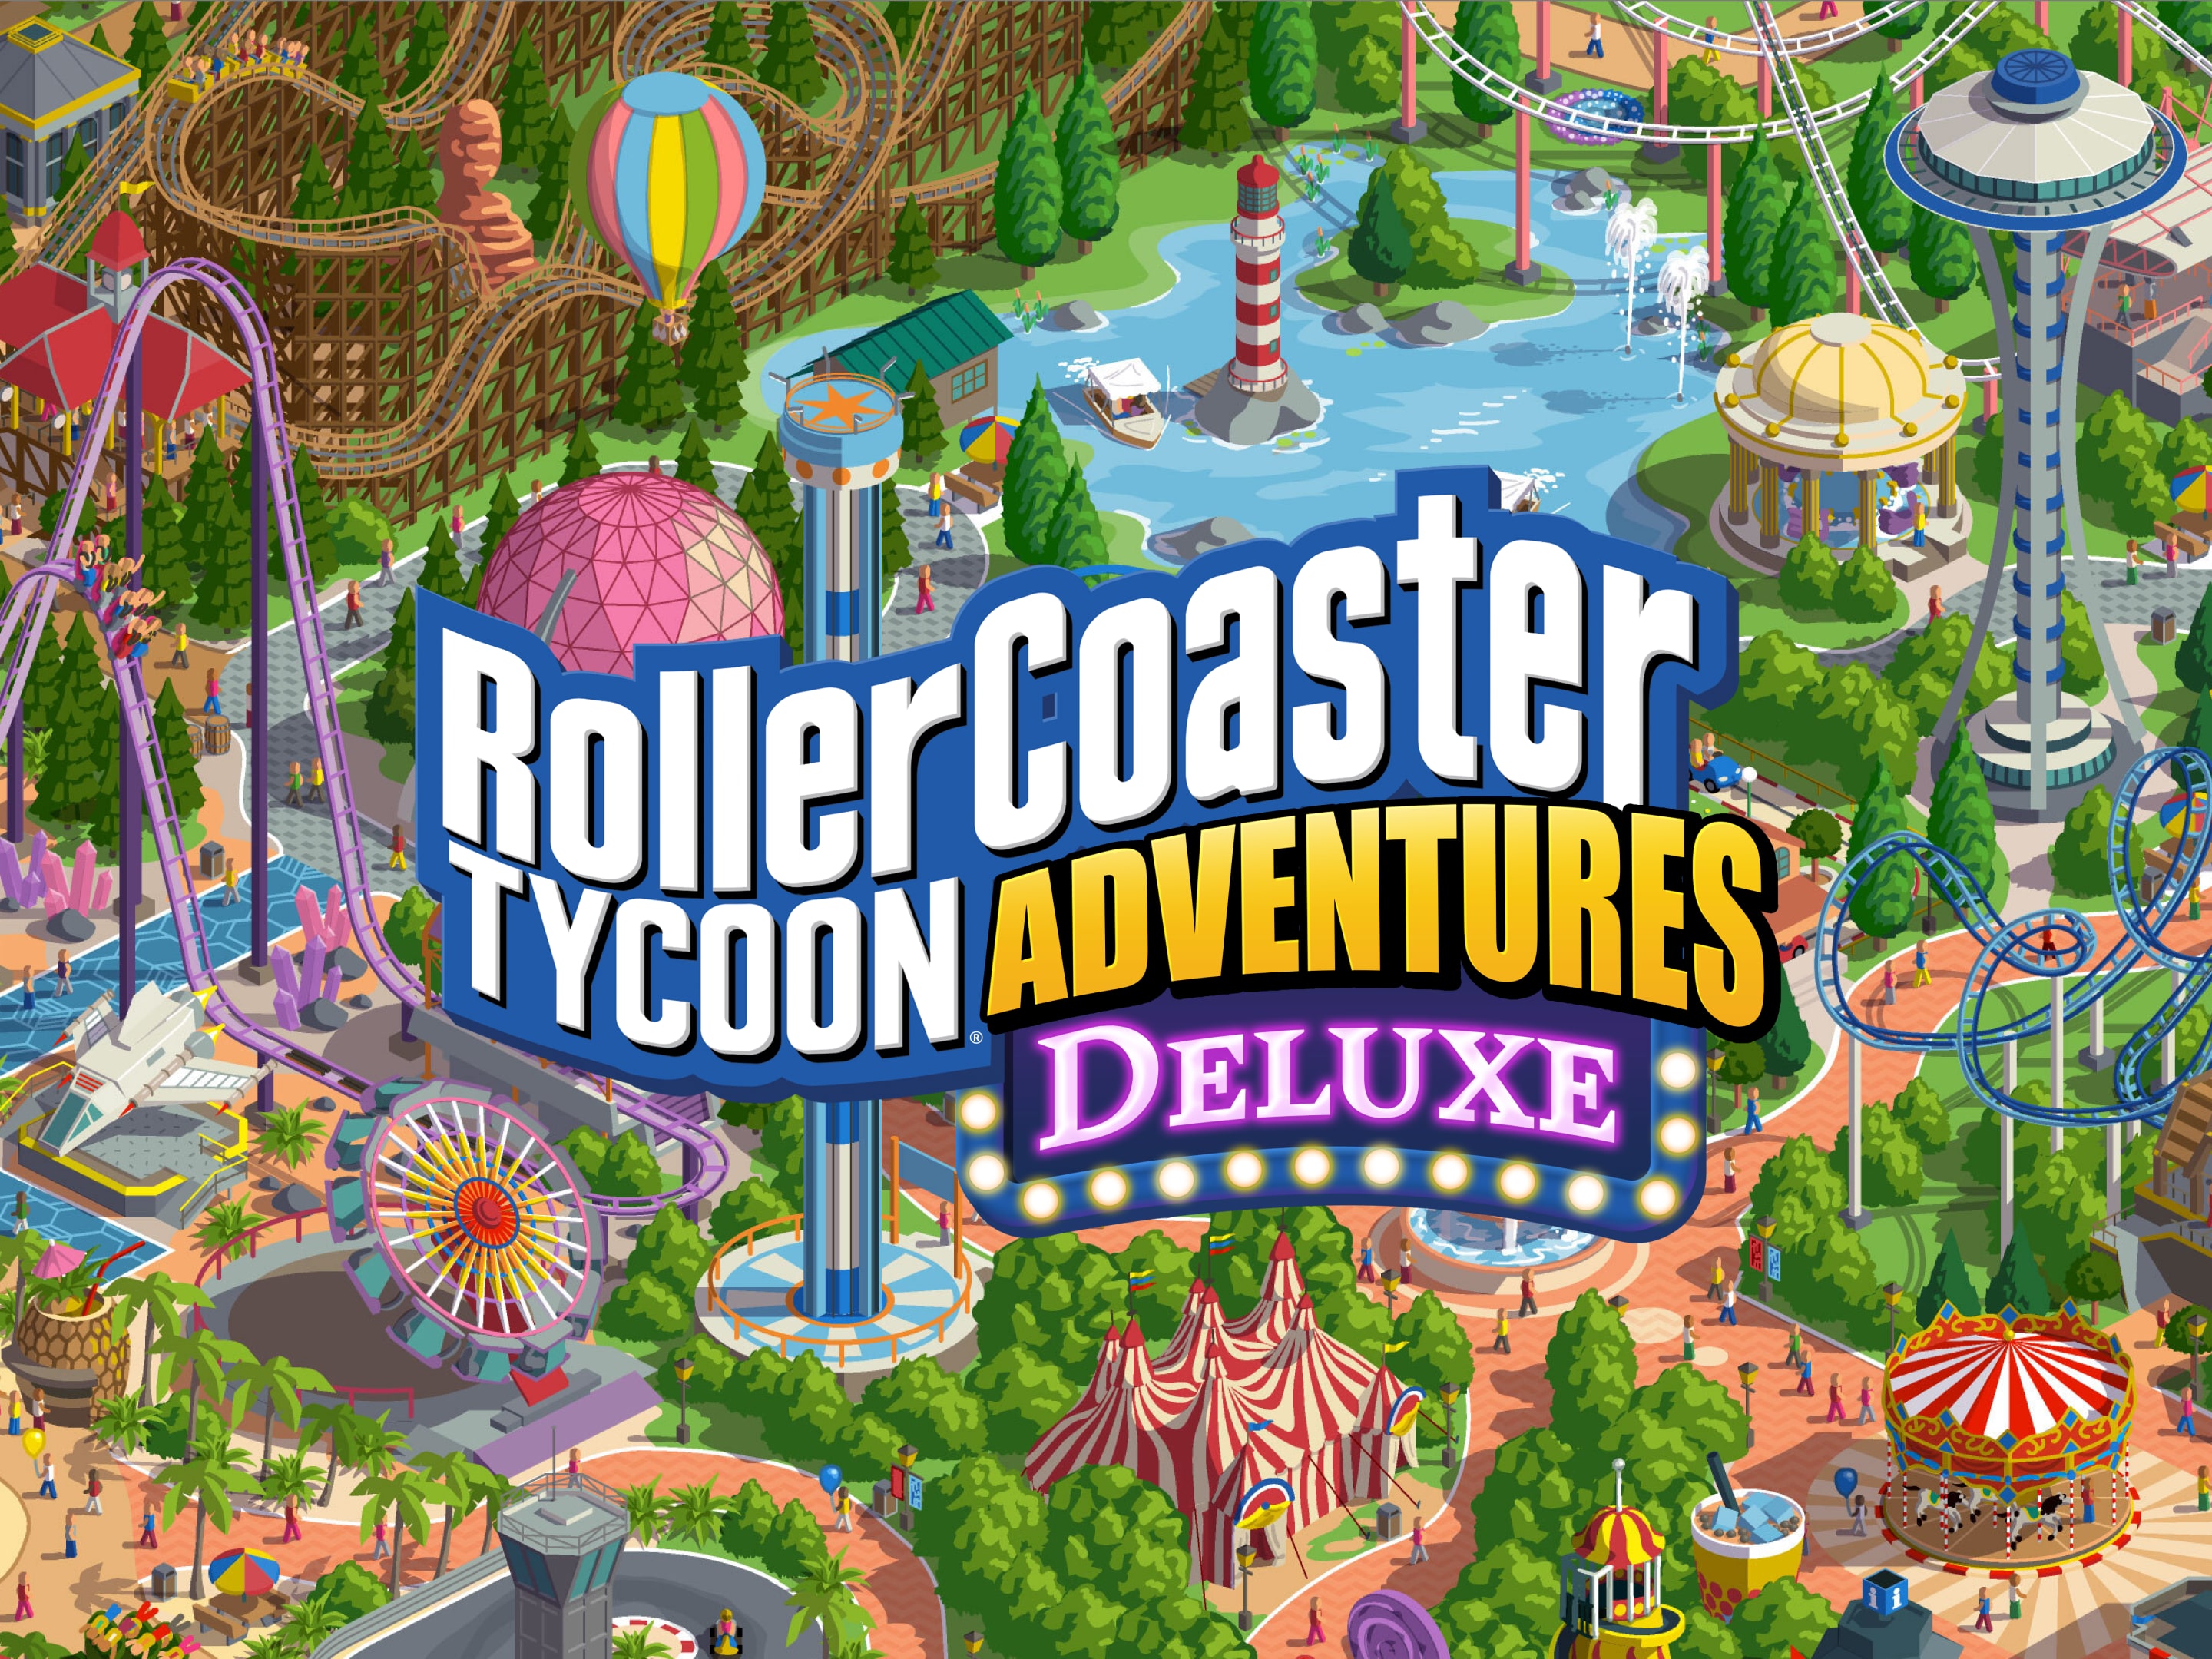 RollerCoaster Tycoon Adventures Deluxe - PlayStation 5, PlayStation 5